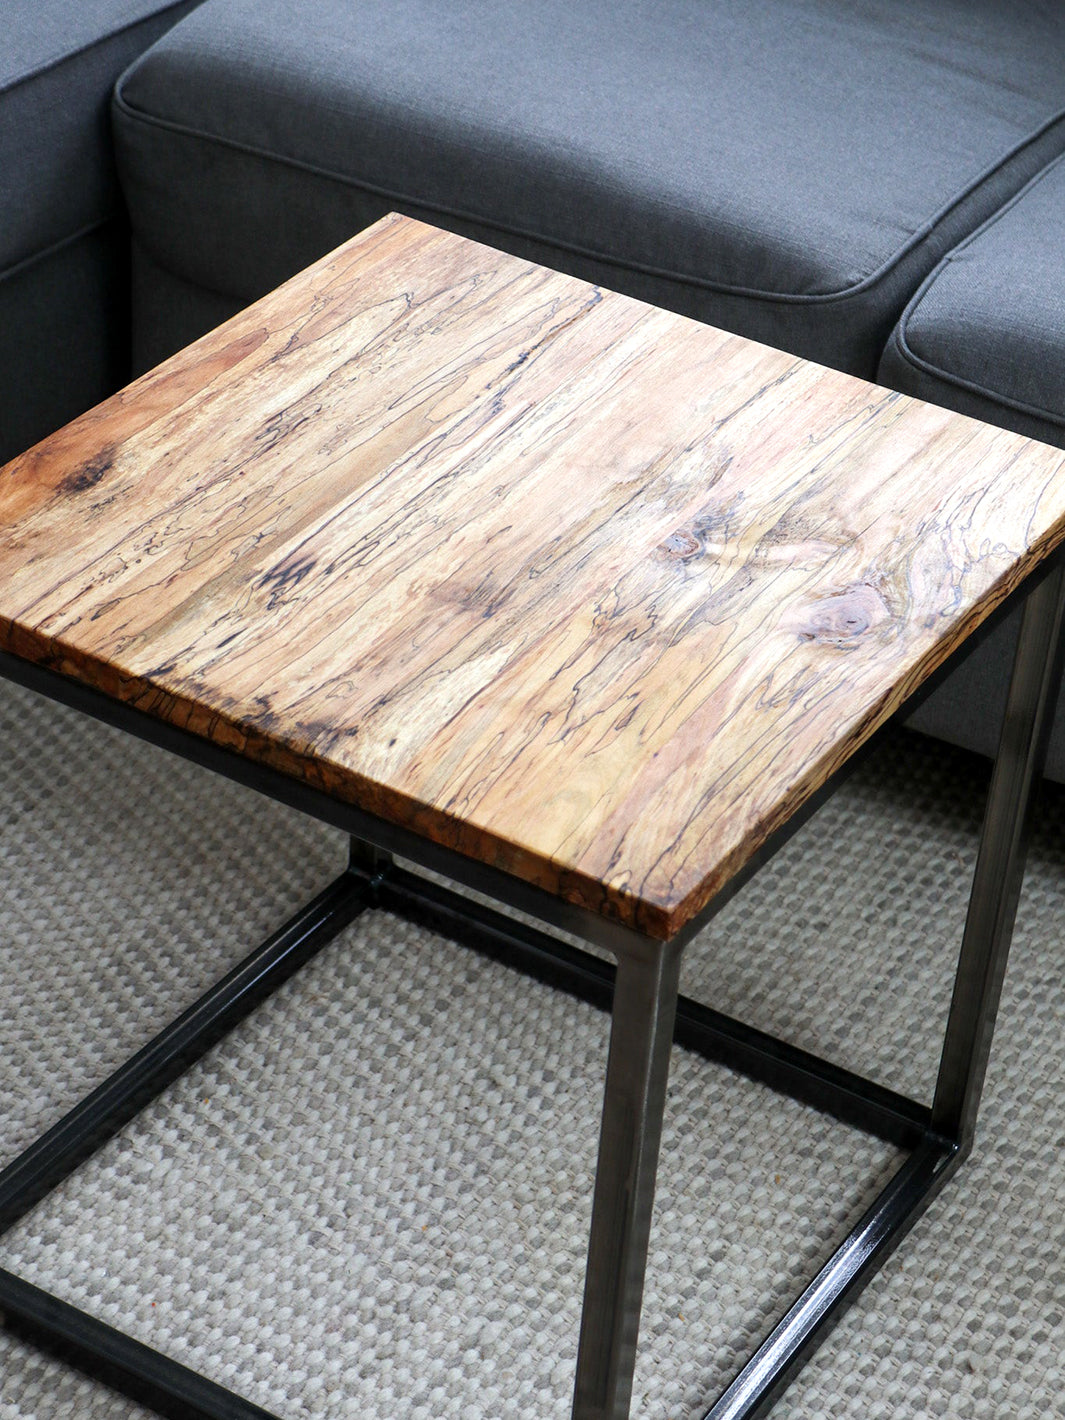 Spalted Maple Cube 18" Coffee Table, Side Table, Solid Wood Table Earthly Comfort Side Tables 2111-7